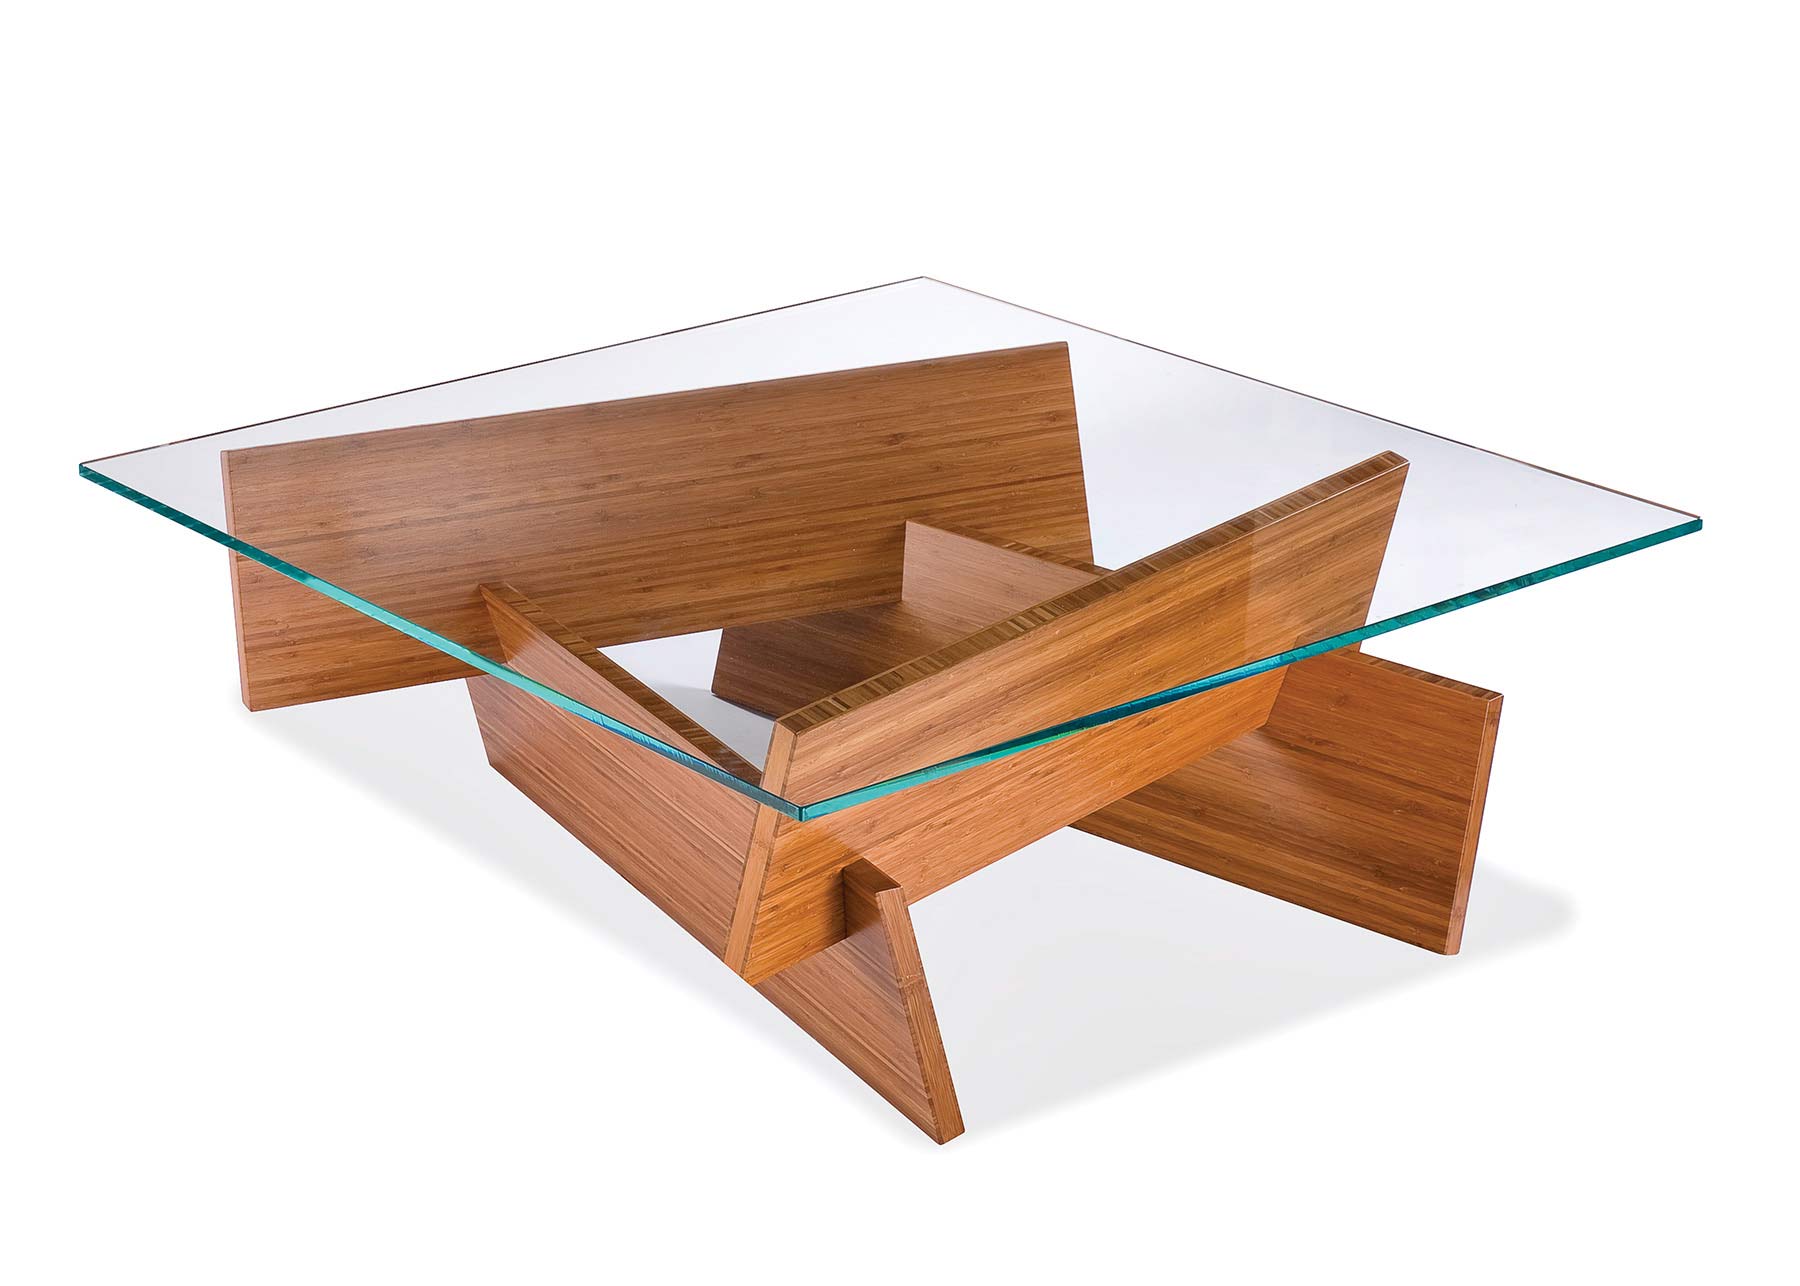 wooden coffee table designs with glass top photo - 6